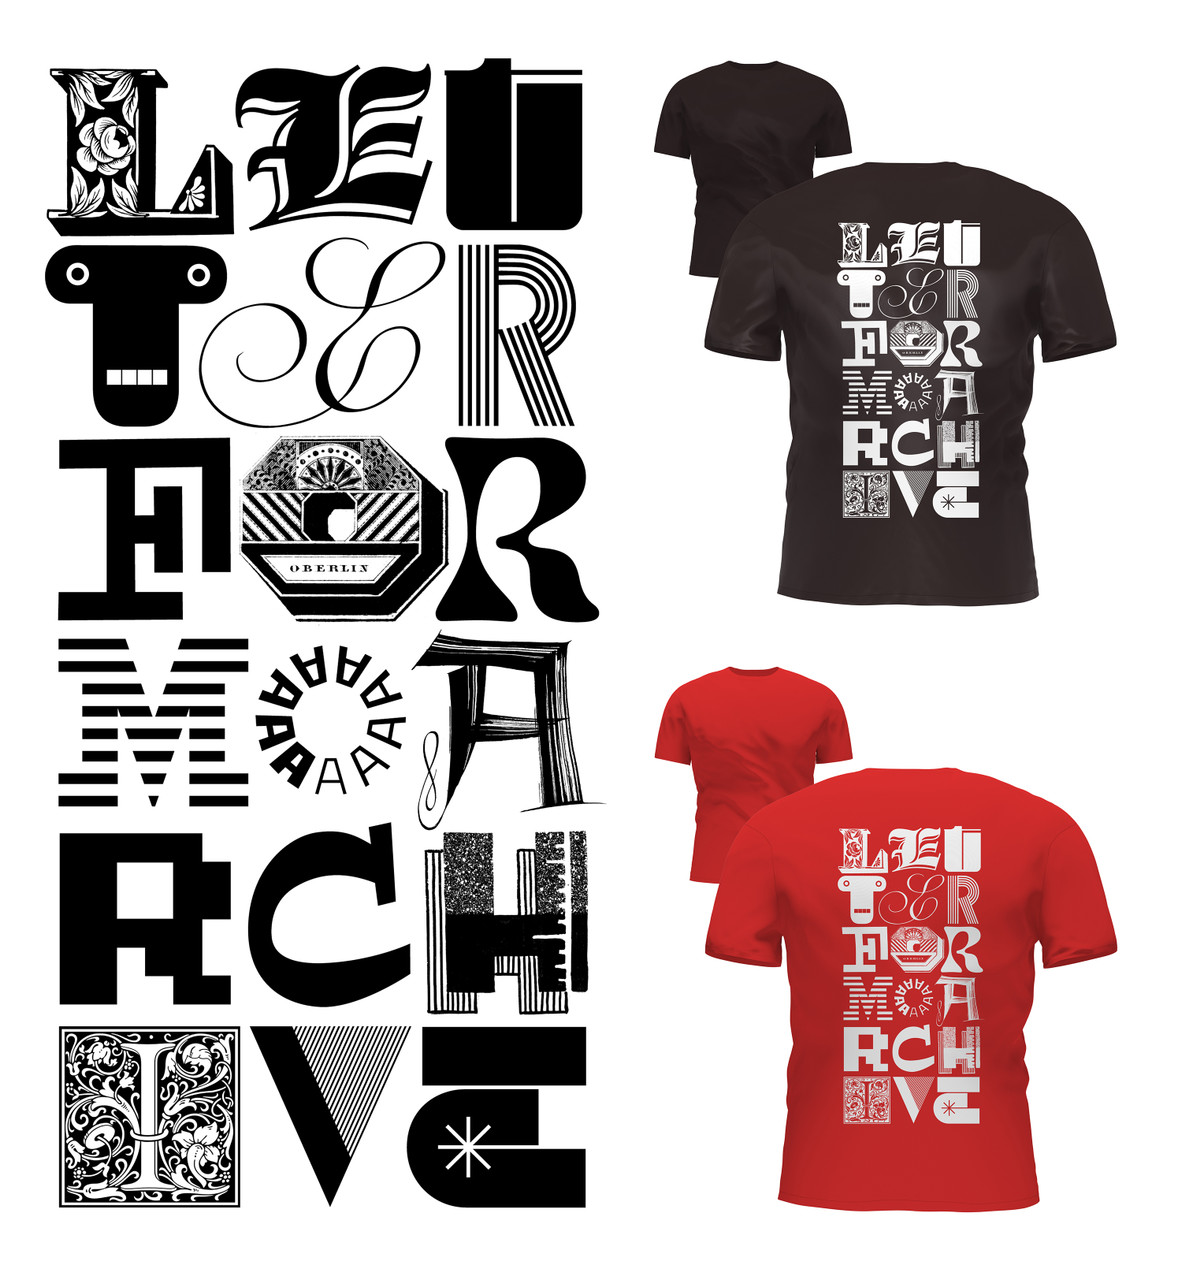 Artwork for t-shirts with the word “LETTERFORM ARCHIVE” in three columns of letters from various sources.